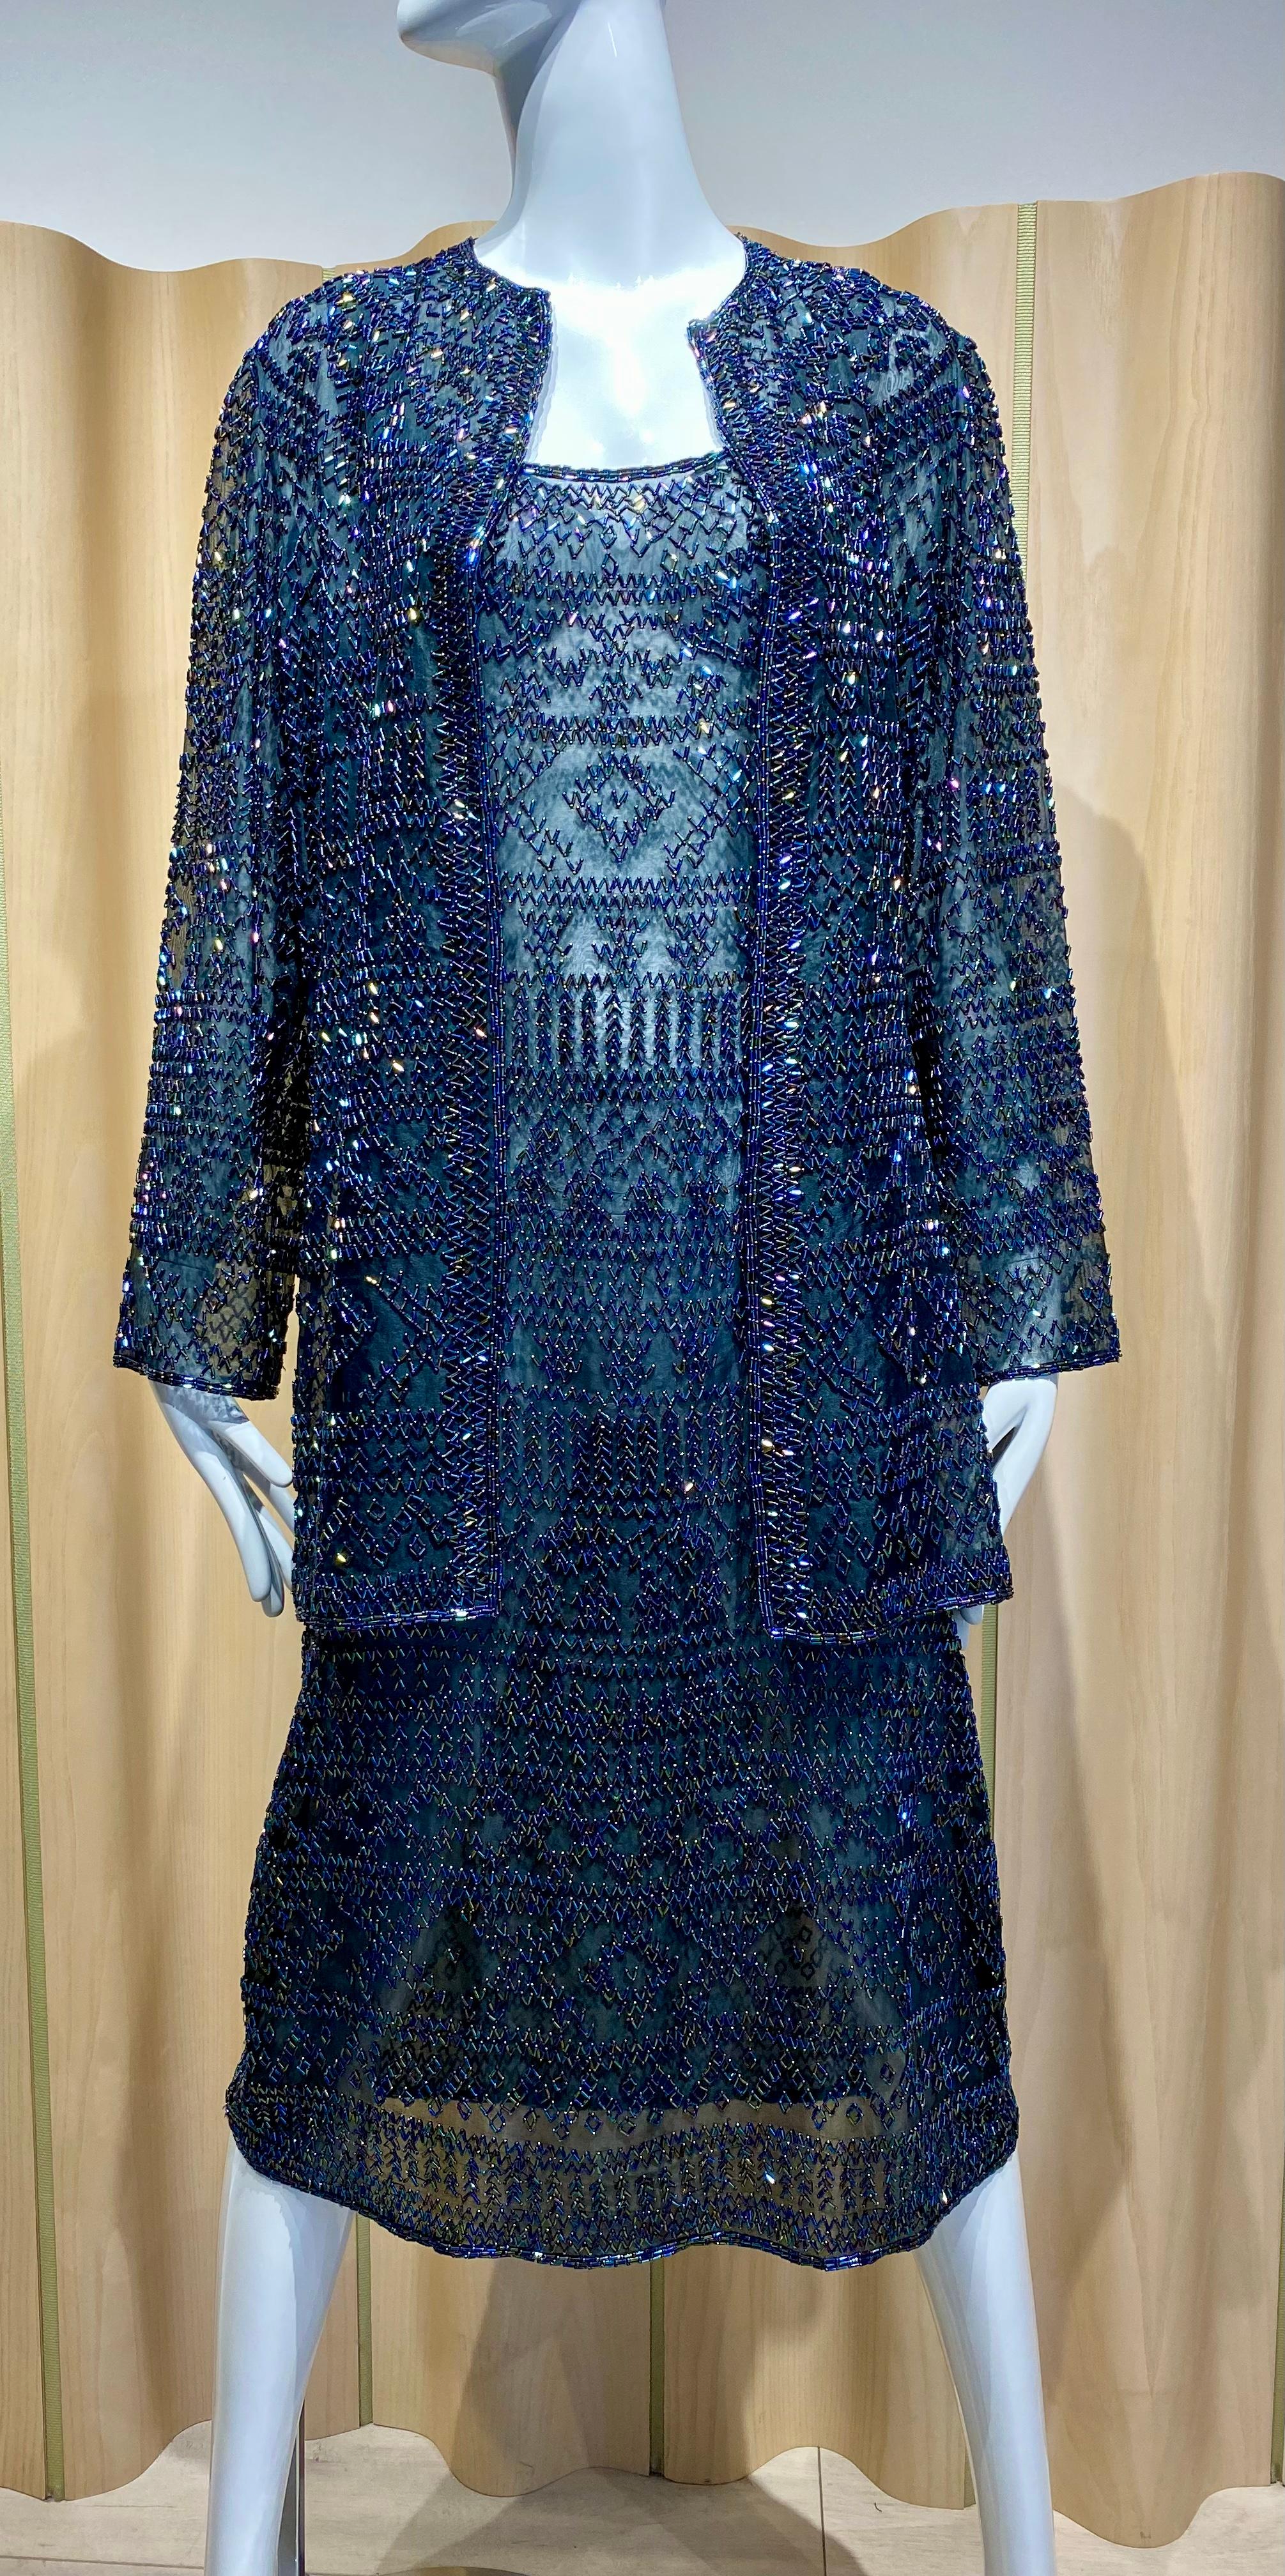 1980s Halston Black beaded sleeveless cocktail dress with cardigan jacket.
Dress and jacket weigh around 5lb
Dress and Jacket in great condition. ( see photo from WWD article) attached
Size : Medium (8 or 10) see measurement below :
Dress 
bust -